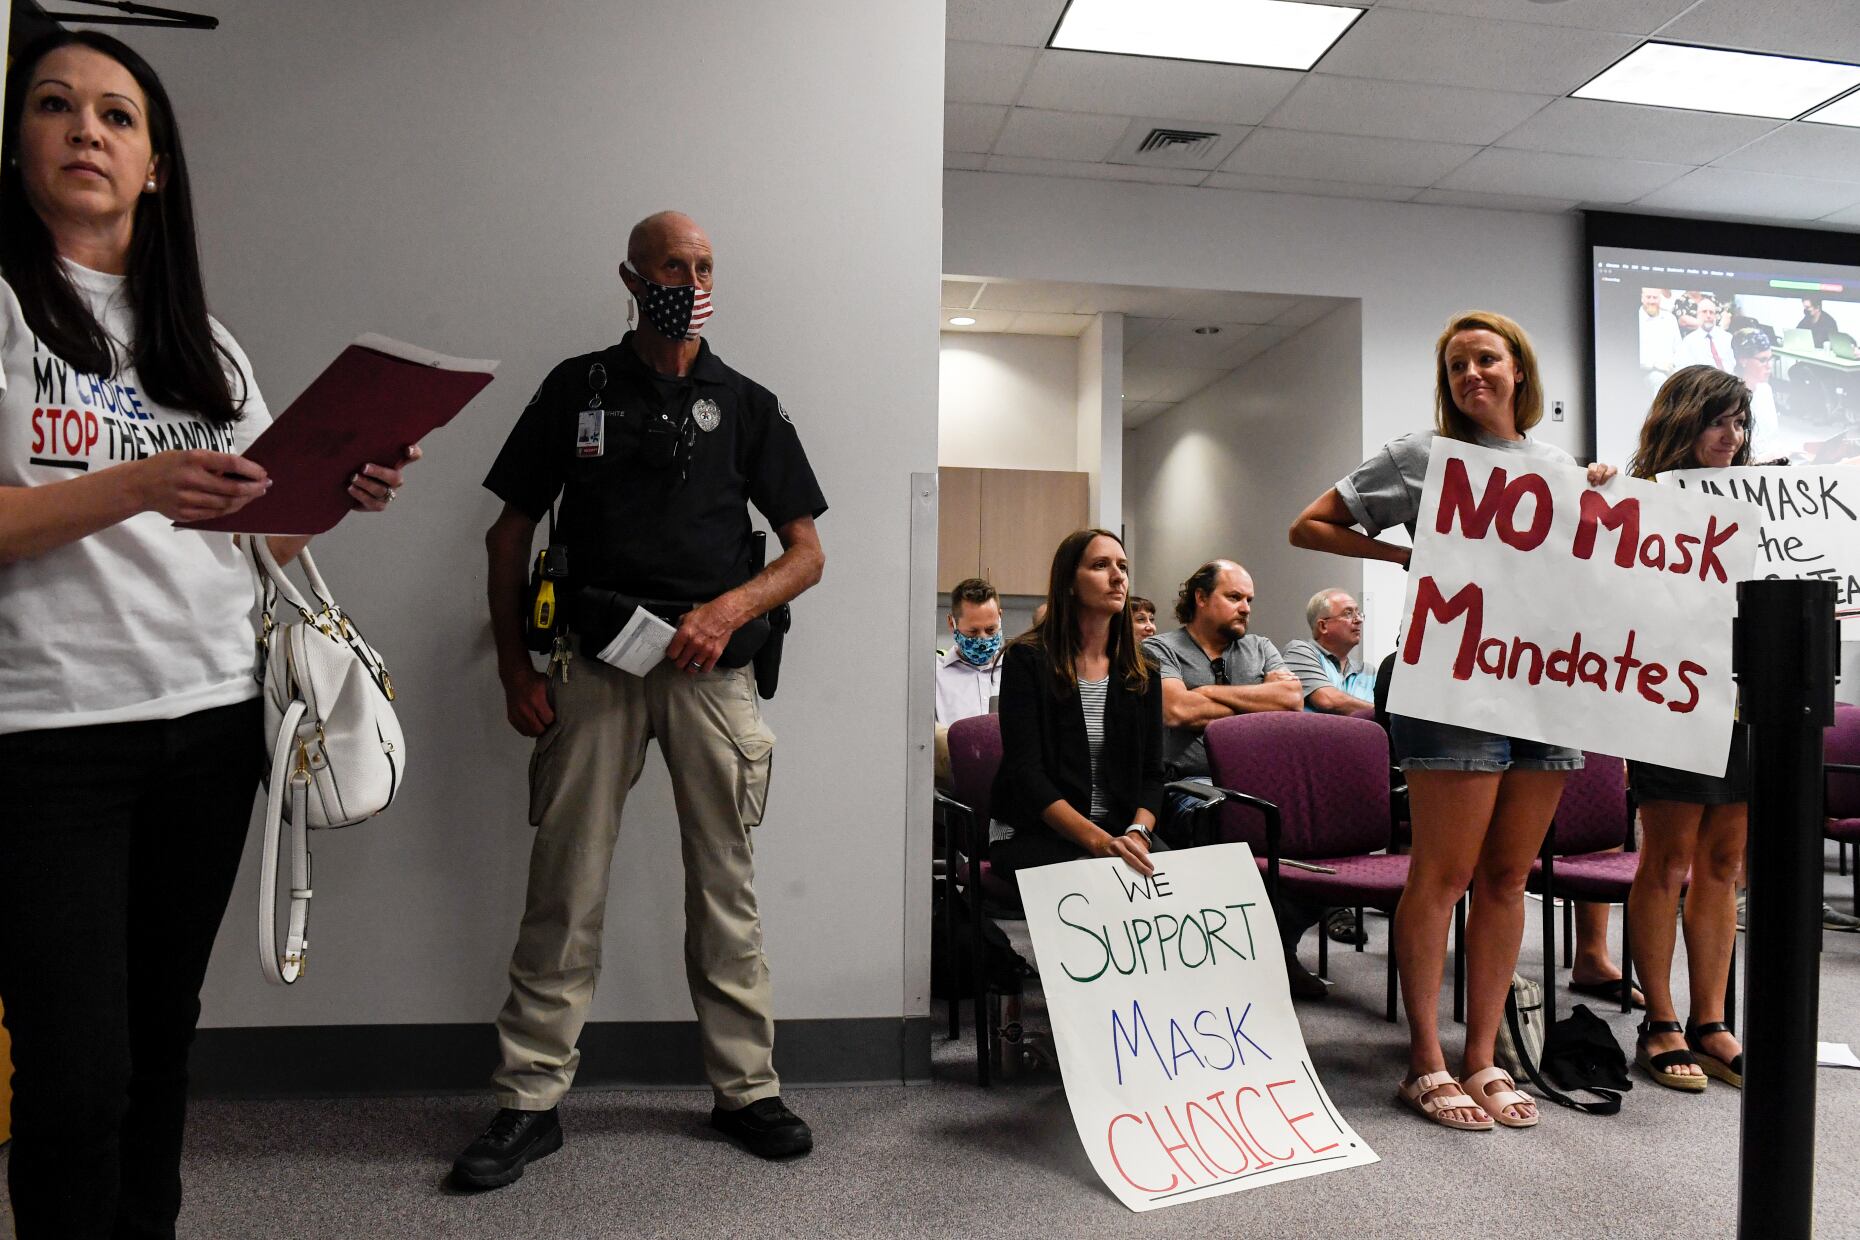 A security officer in a brown and biege uniform stands against a wall surrounded by women carrying signs that say “No mask mandates” and “Support mask choice.”